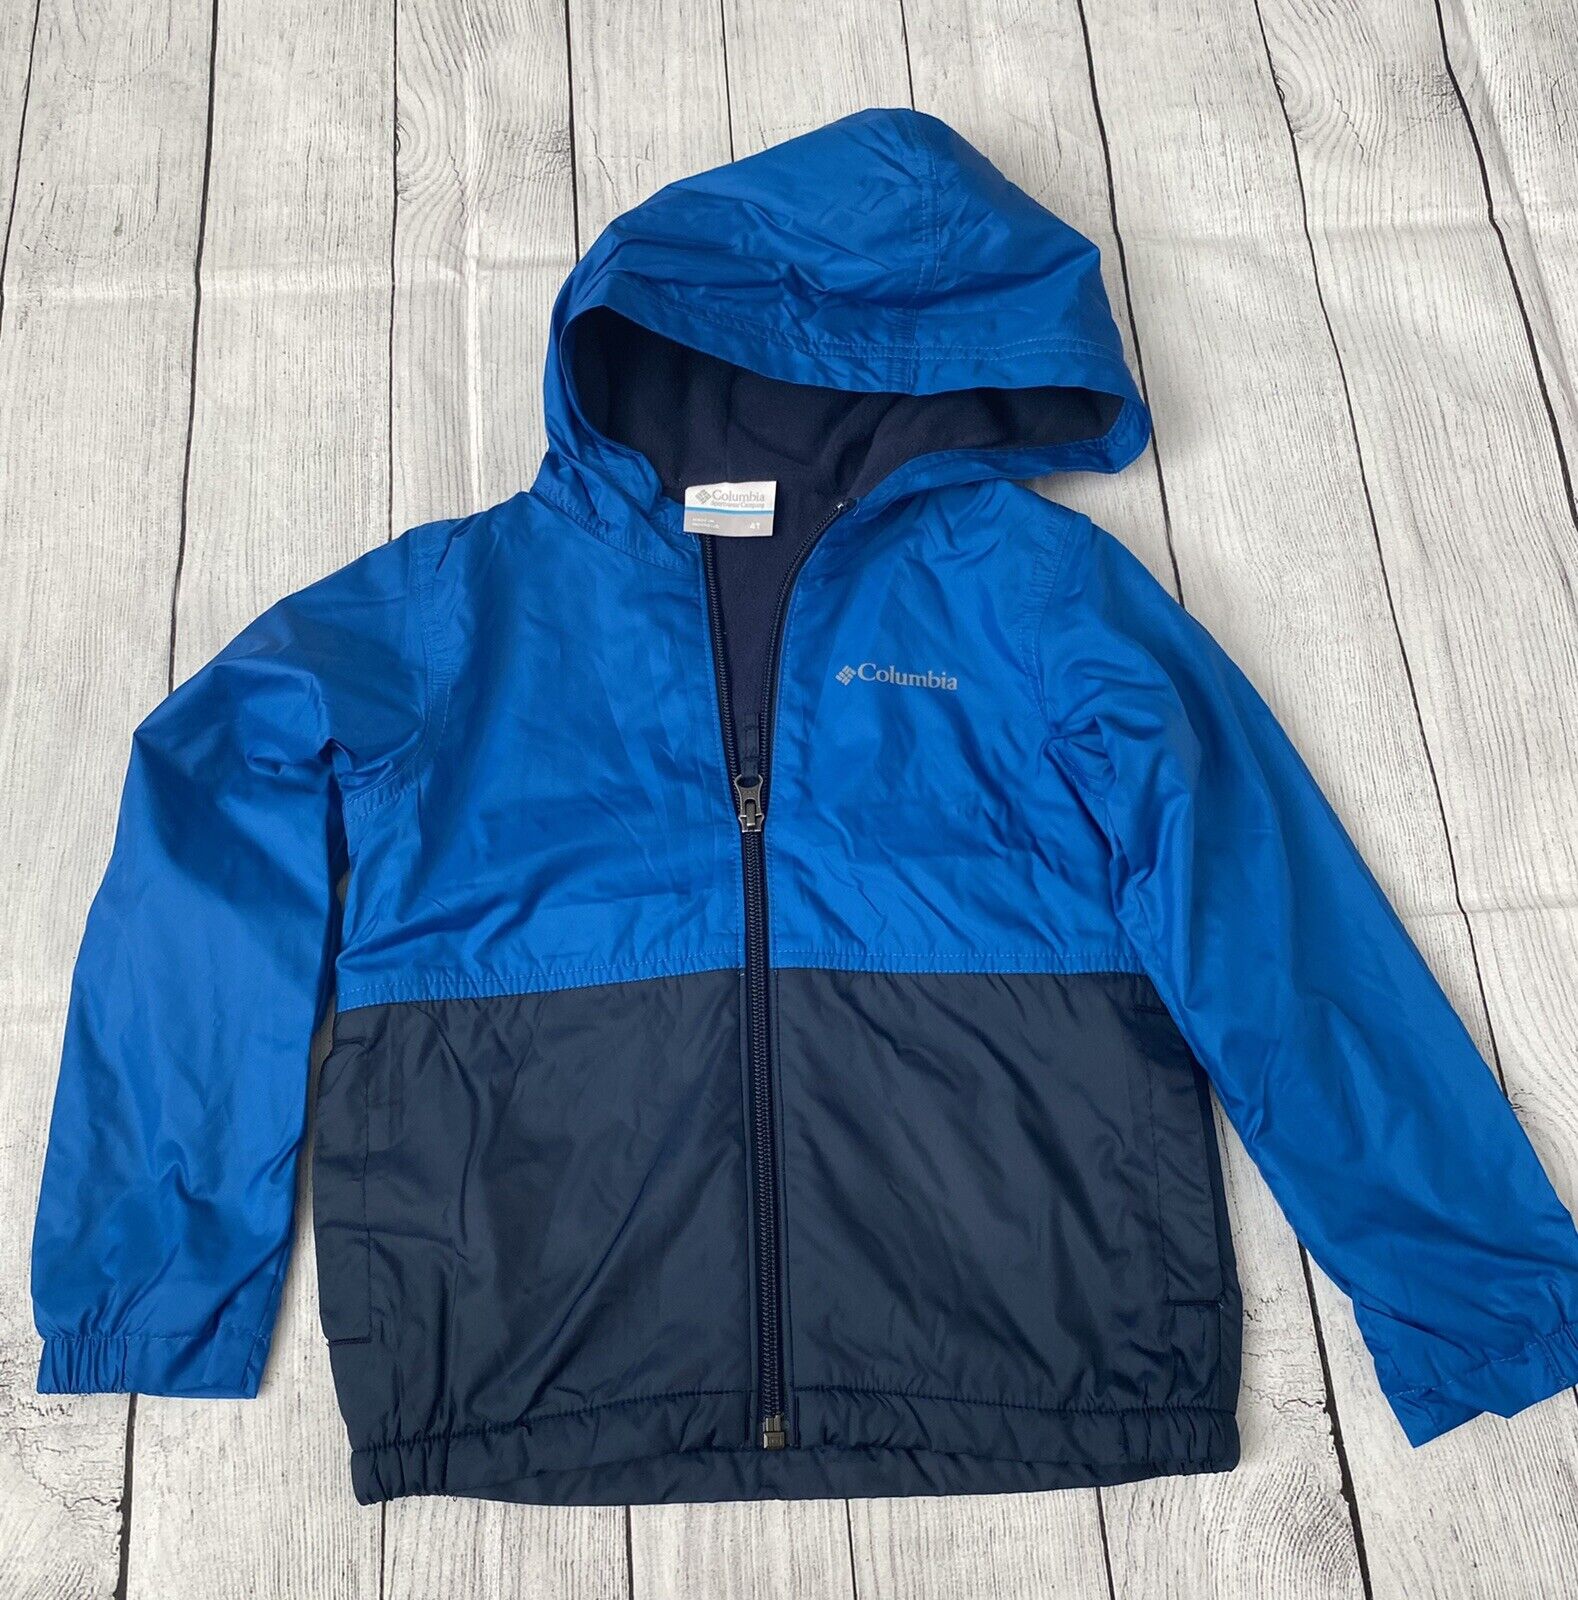 Kids Special price Columbia Winter Blue Jacket youth Size 4T Limited price sale